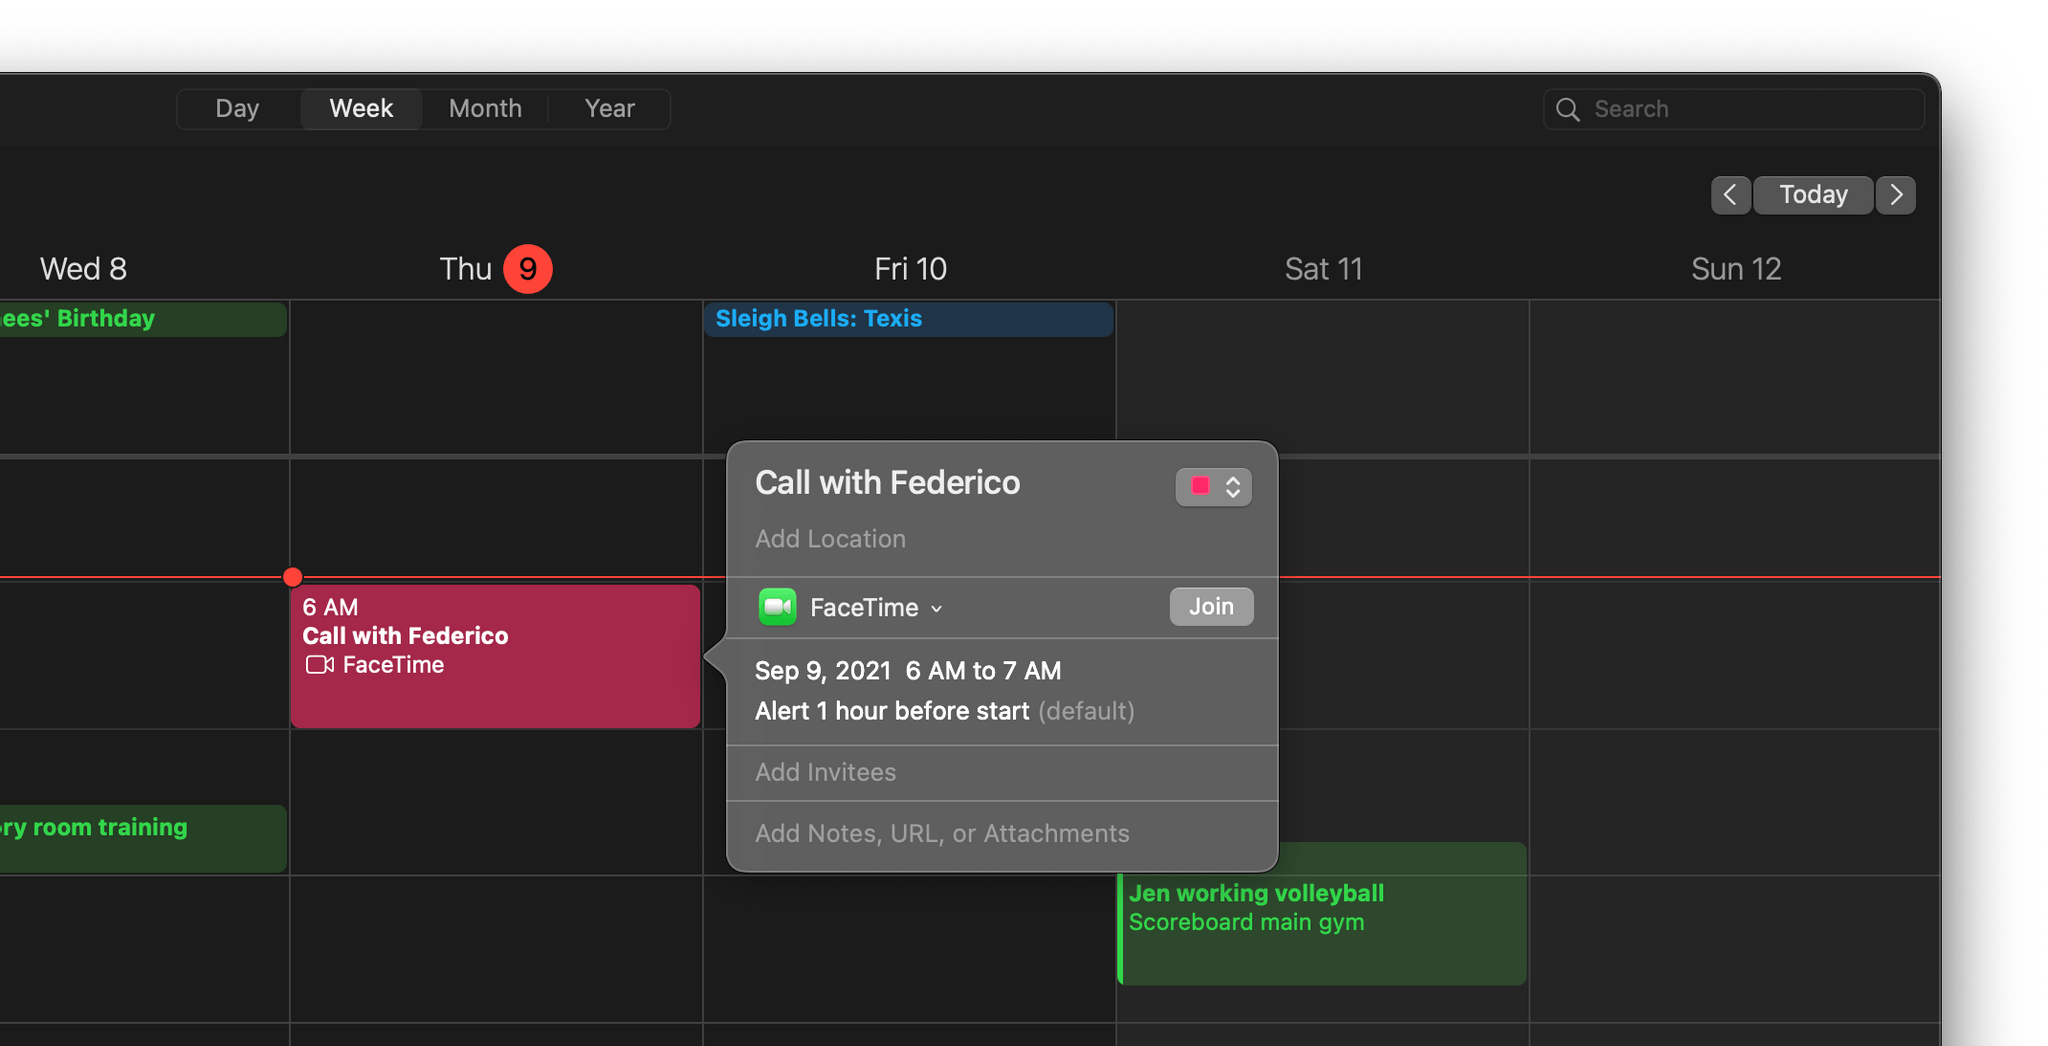 FaceTime links can be generated inside Calendar.